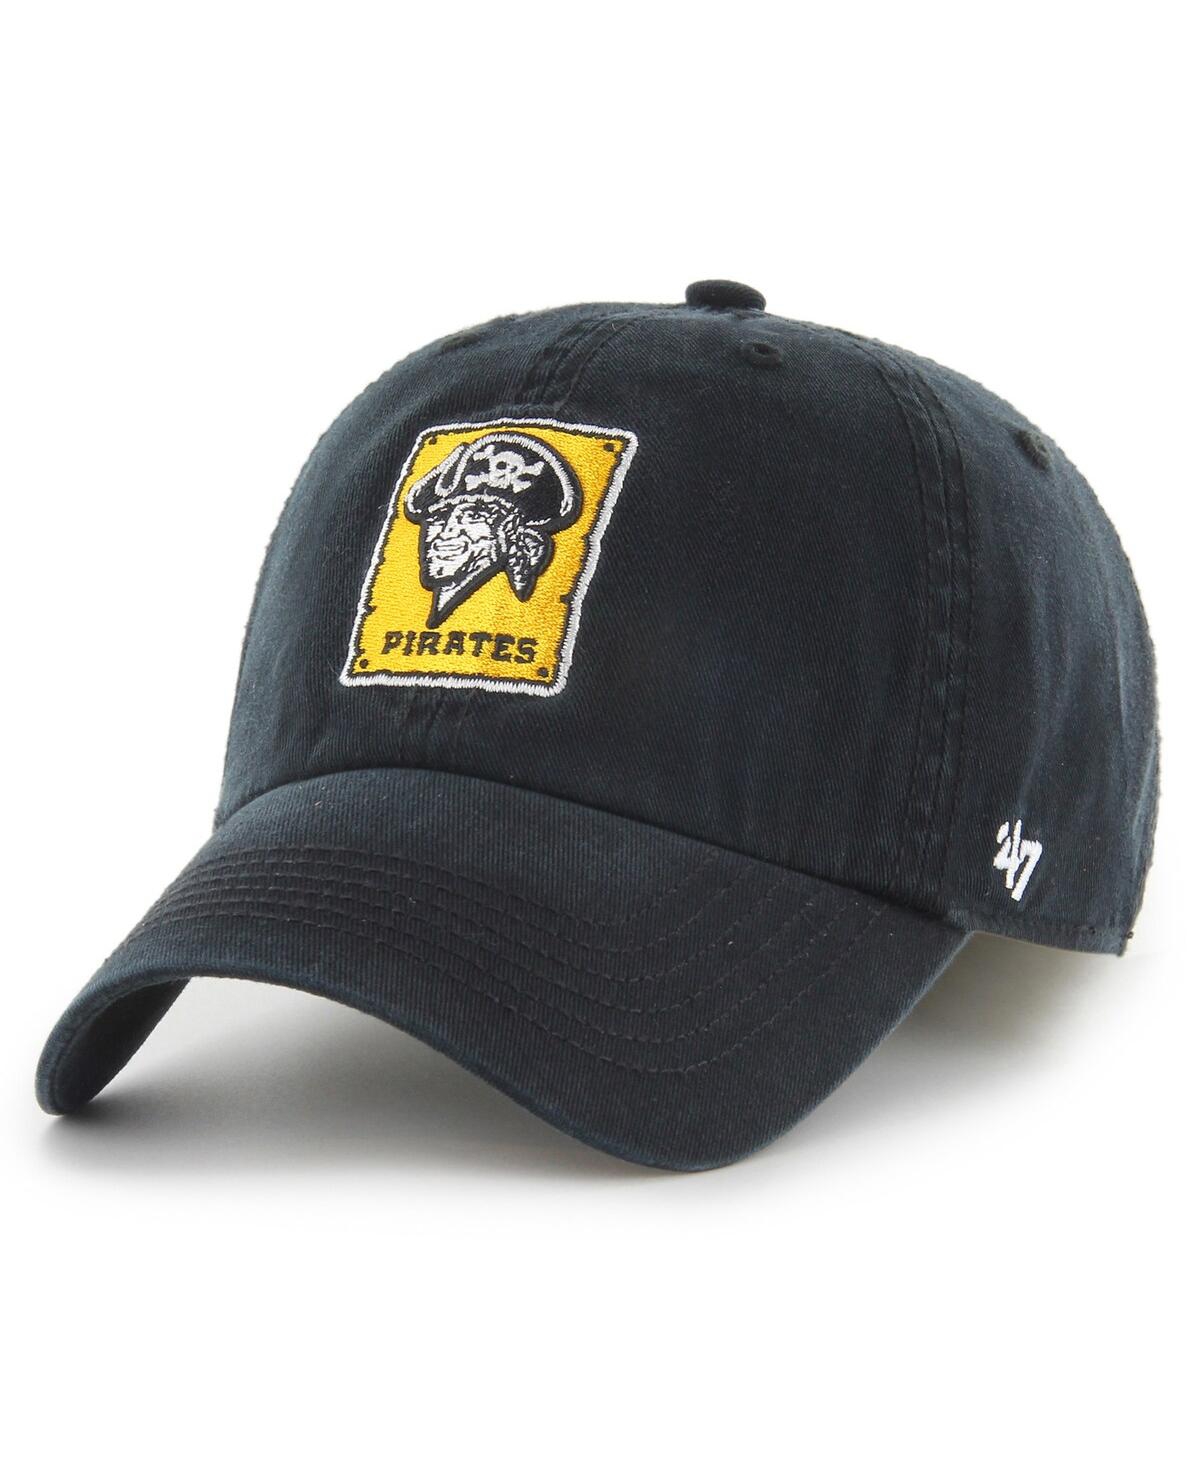 Men's '47 Brand Black Pittsburgh Pirates Cooperstown Collection Franchise Fitted Hat - Black